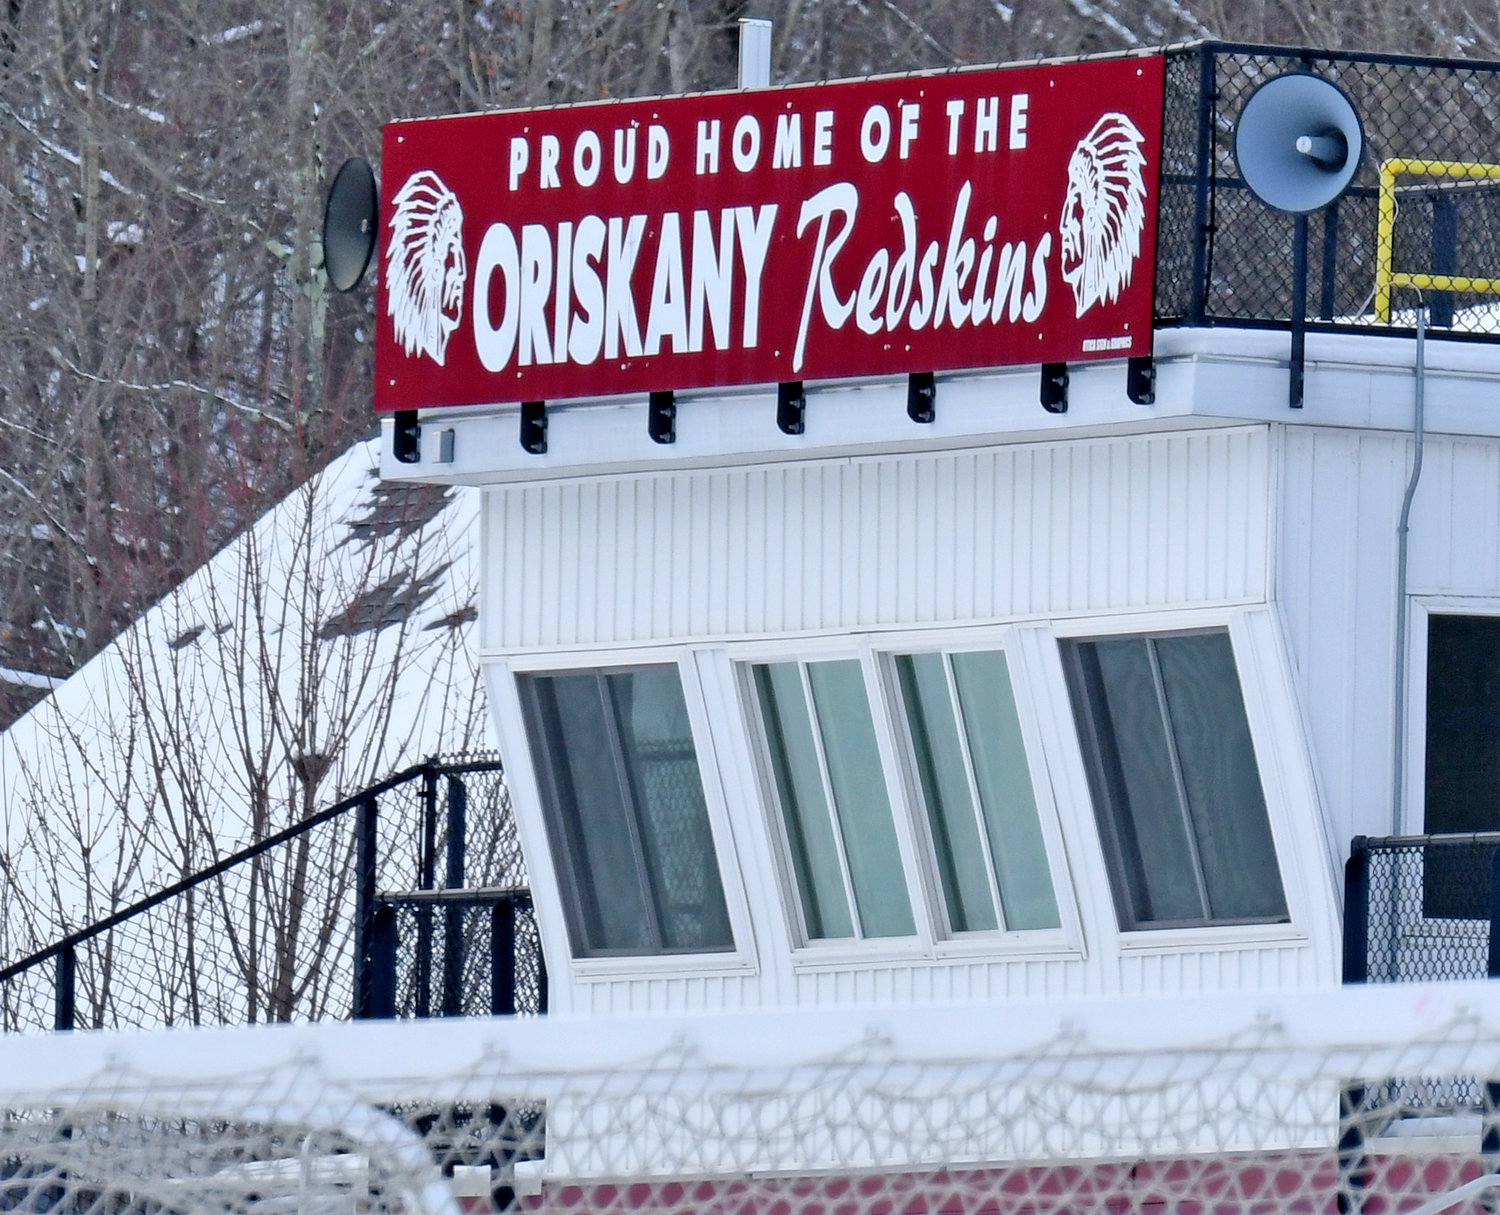 A sign pronounces the ‘home of the Oriskany Redskins’ Monday at Bernie Block Field in Oriskany.